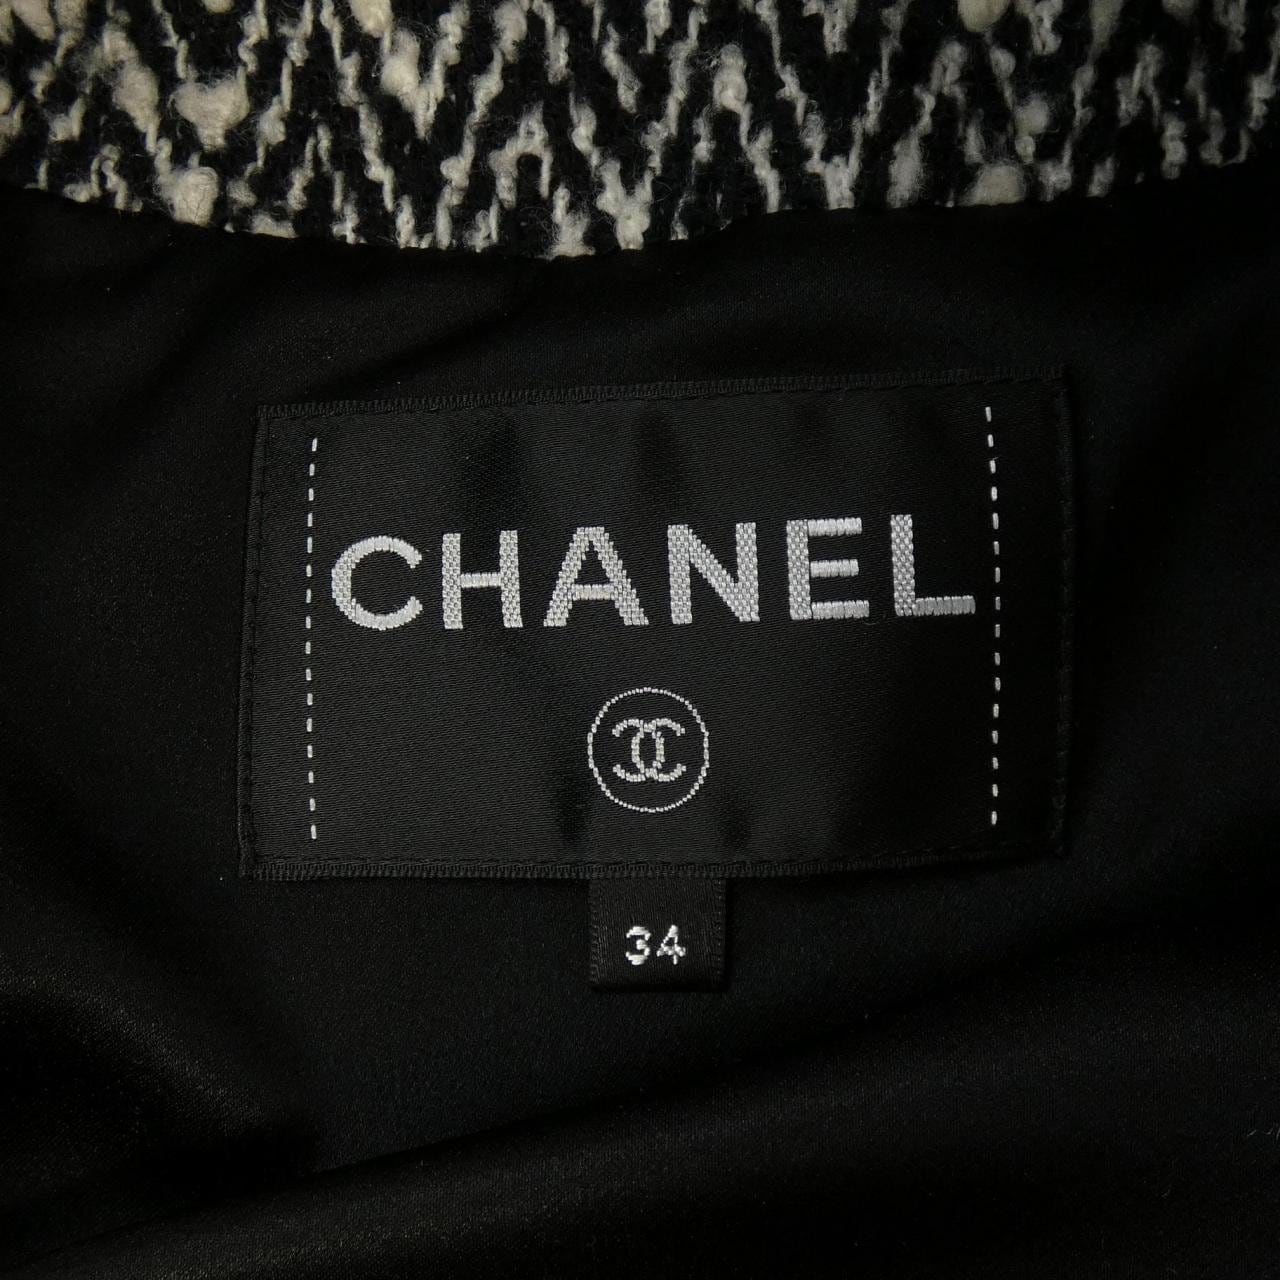 CHANEL CHANEL Court